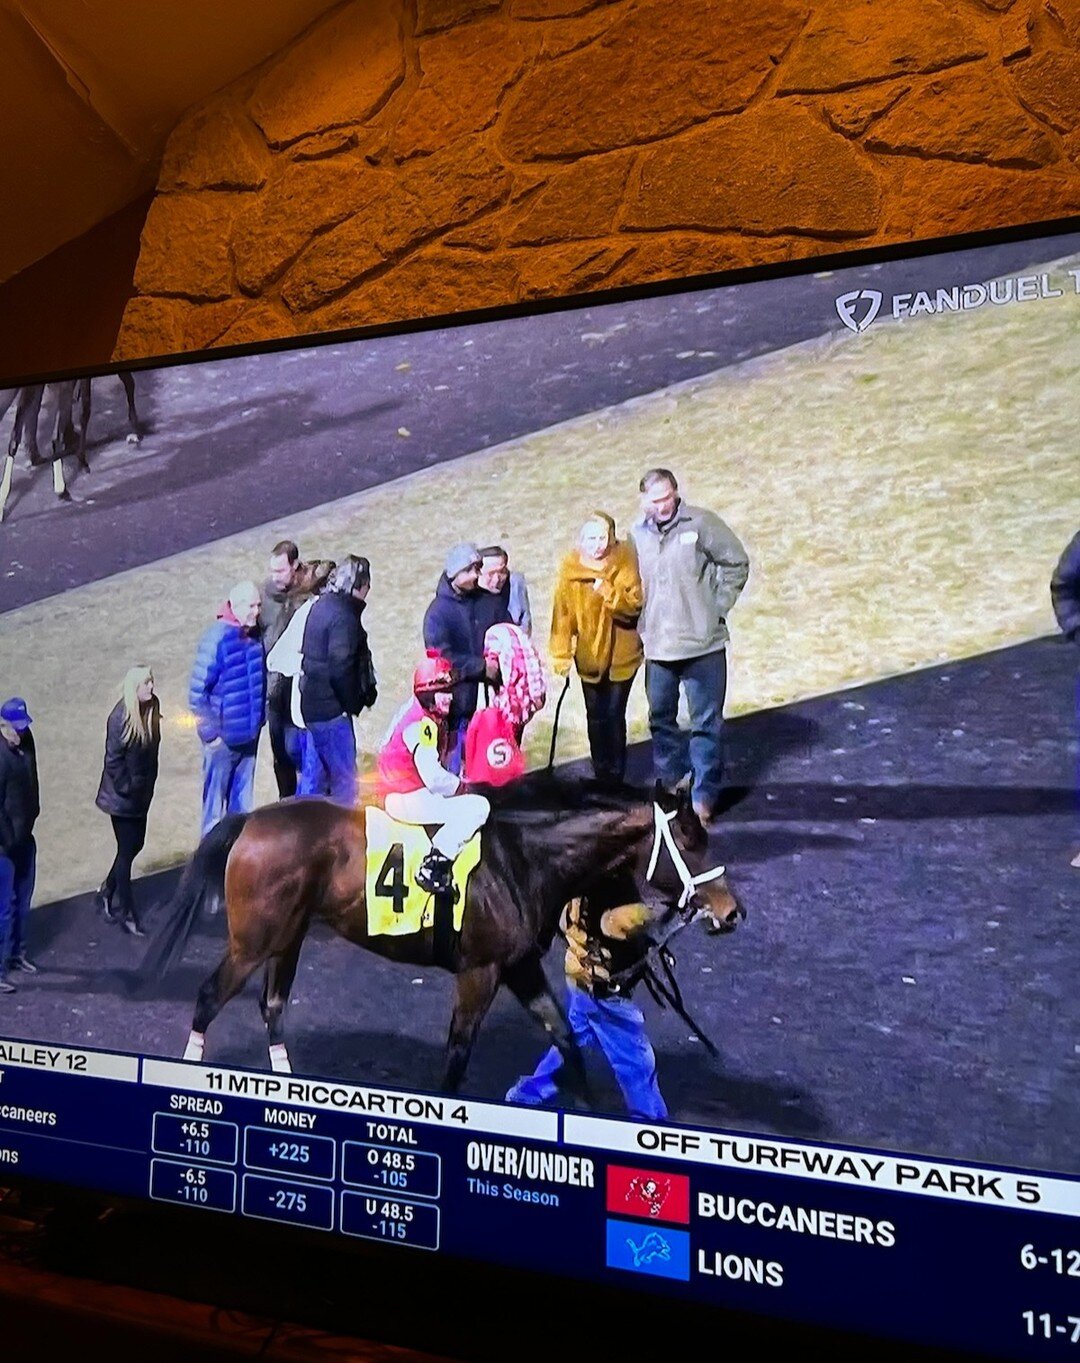 Caberneigh (Munnings/Boudicea's Revenge) - bred, foaled and raised by War Horse Place Farm won MSW 70K by a length and a half last night at Turfway Park! 

Congrats to all connections!